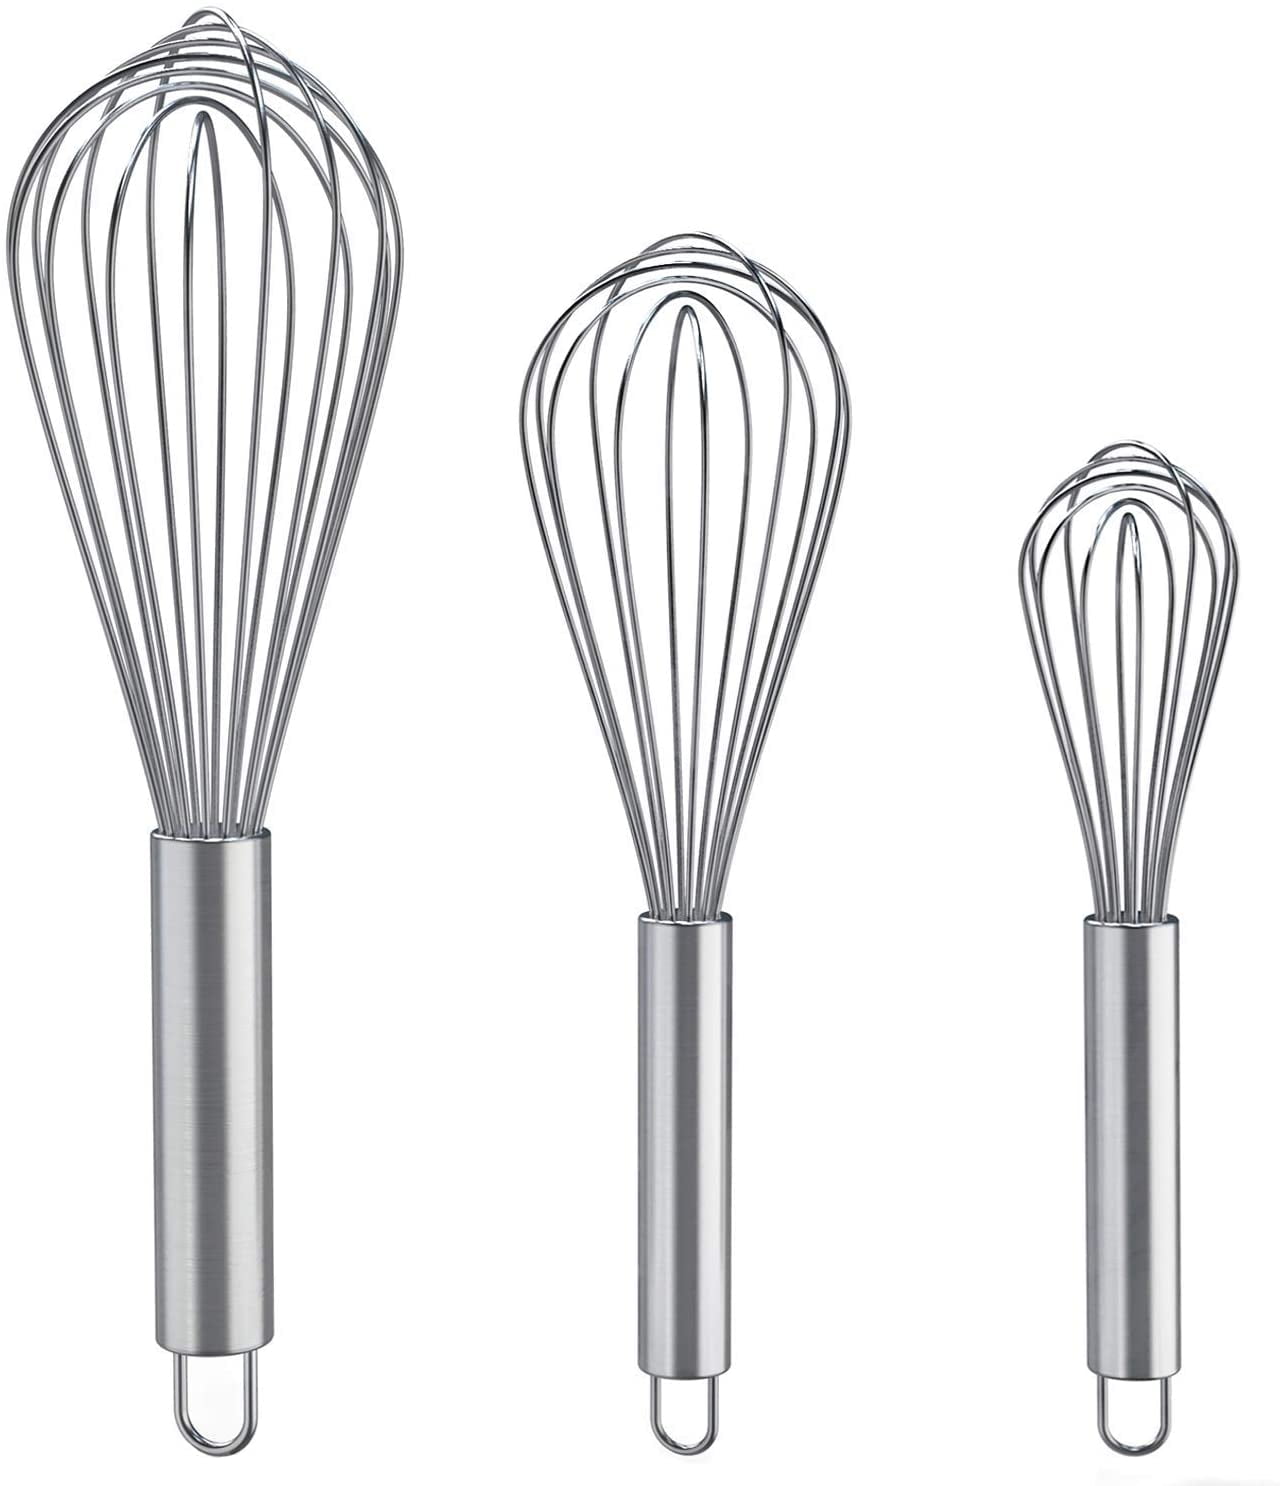 Fox Run Set of 3 Stainless Steel Wire Balloon Whisks, 8 inch, 10 inch and 12-Inch